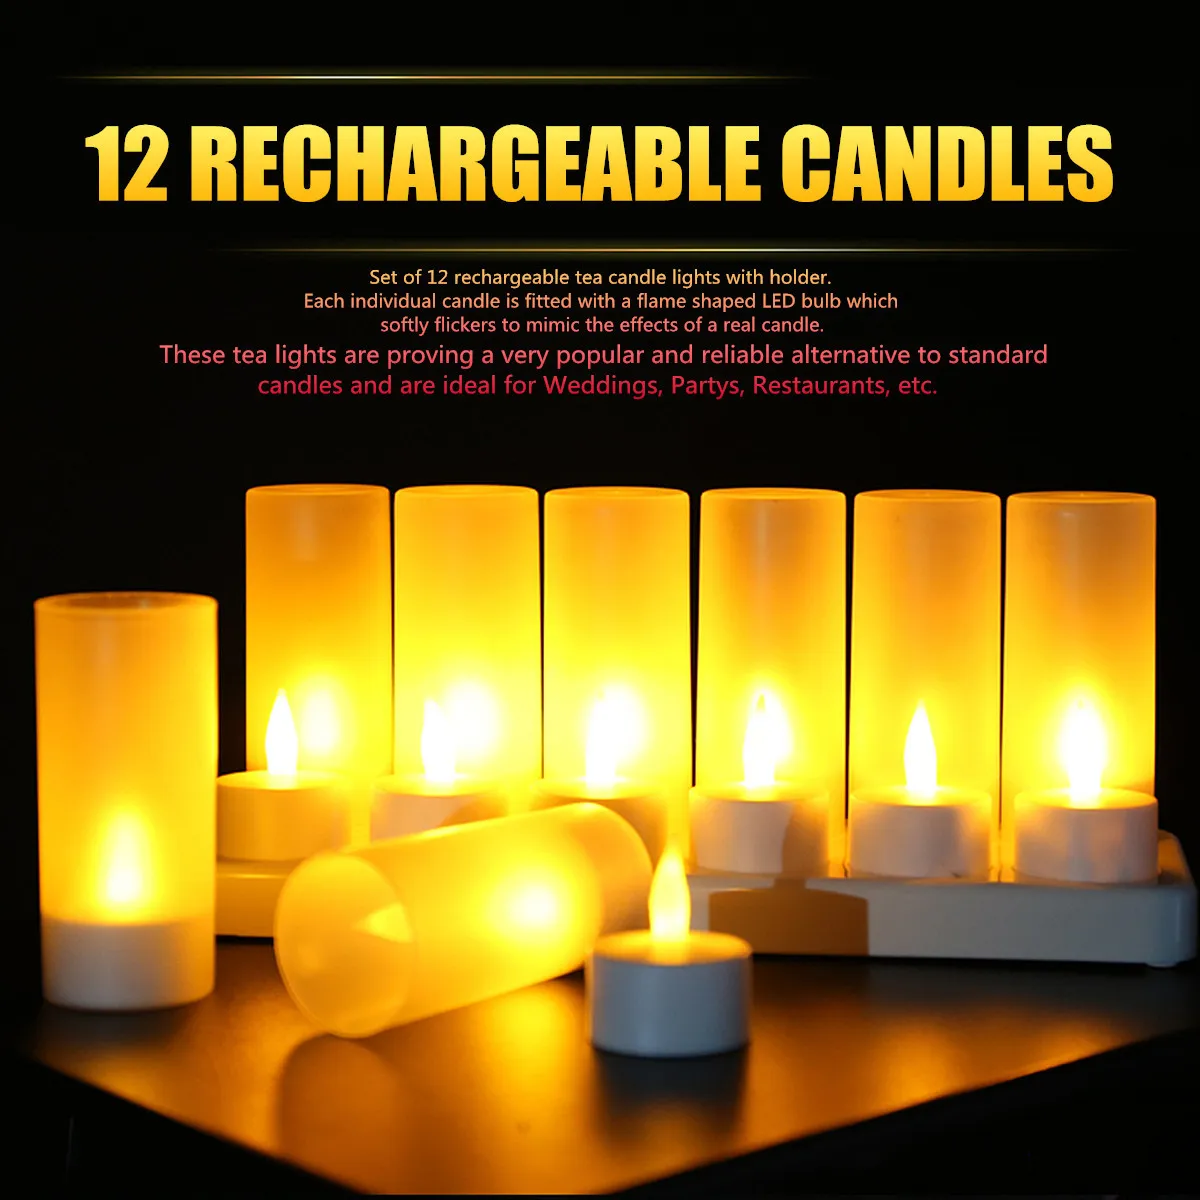 Creative LED Bandle lampe rechargeable Chandelle vacillante Light Night Simulation Flame Tea Light for Home Wedding Decoration L7327223